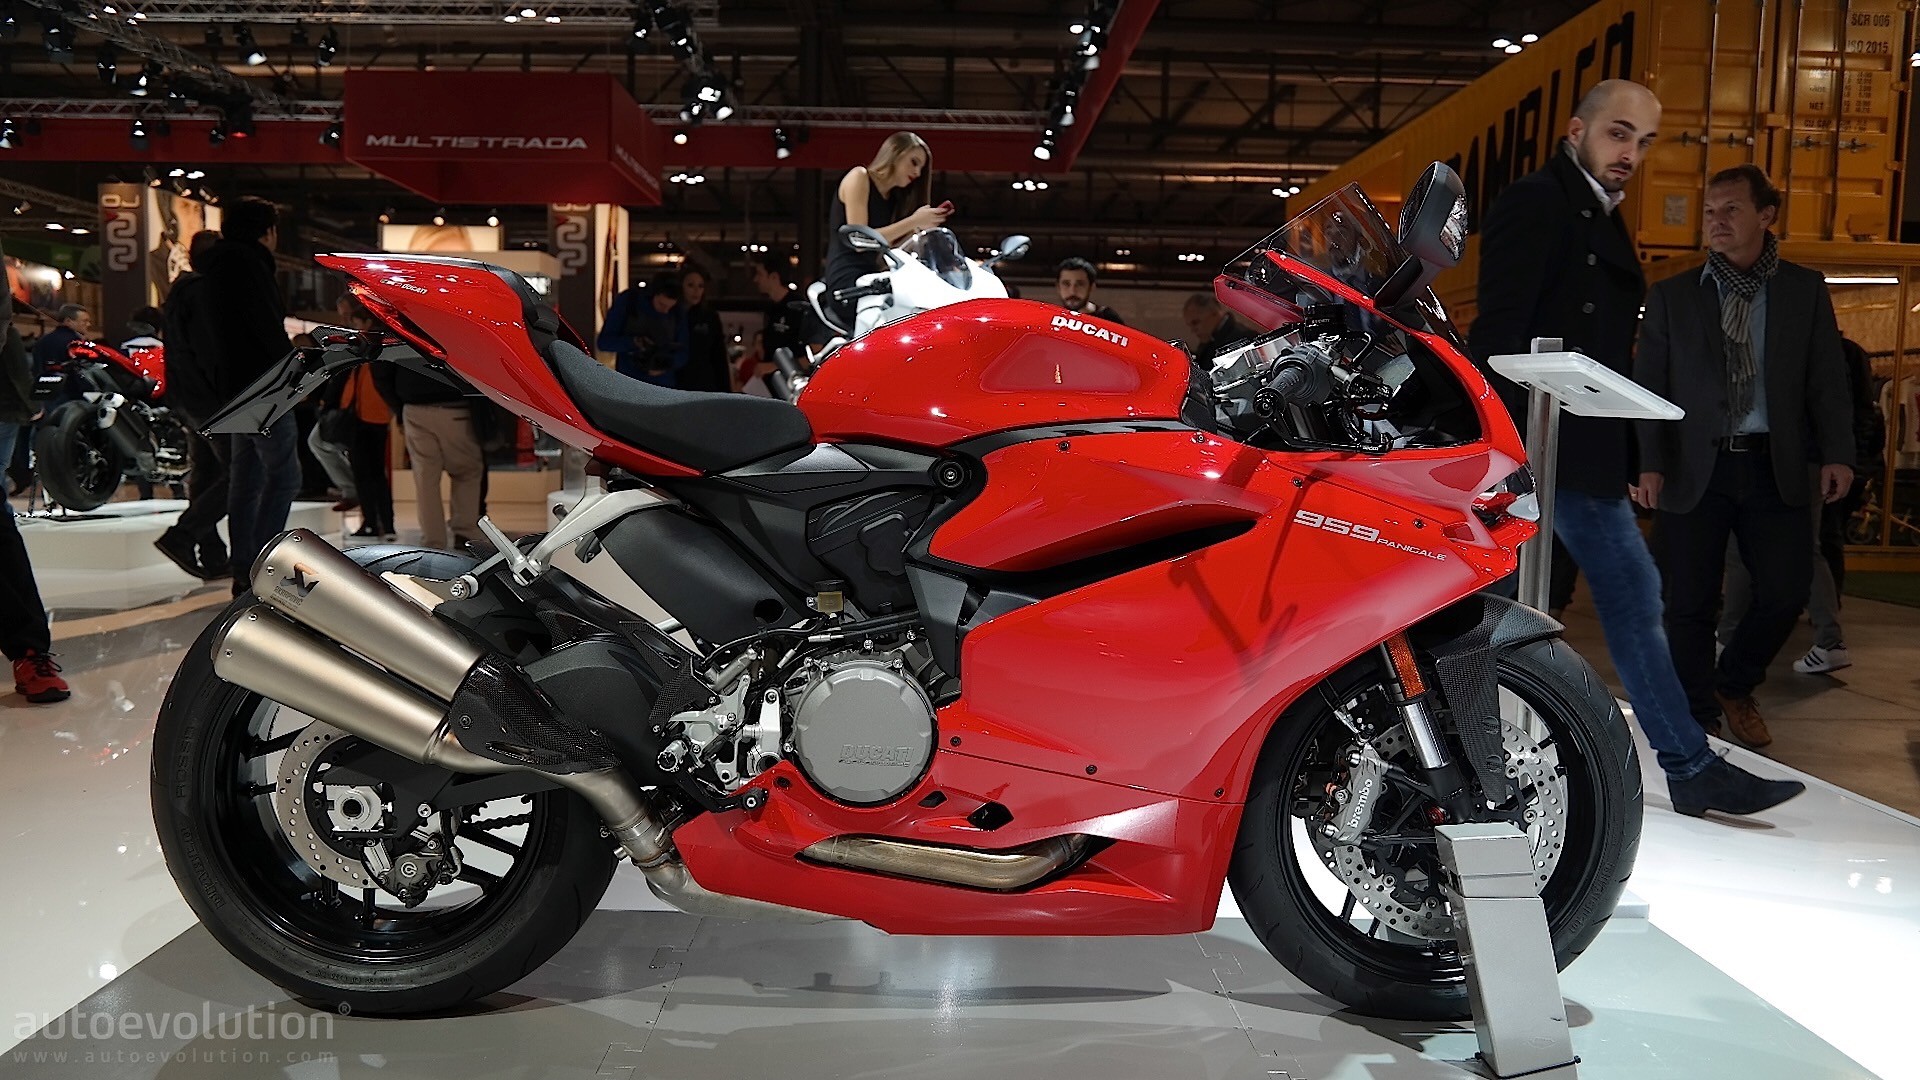 EICMA 2015 Ducati 959 Panigale Sits Between Supersport and Superbike Beasts